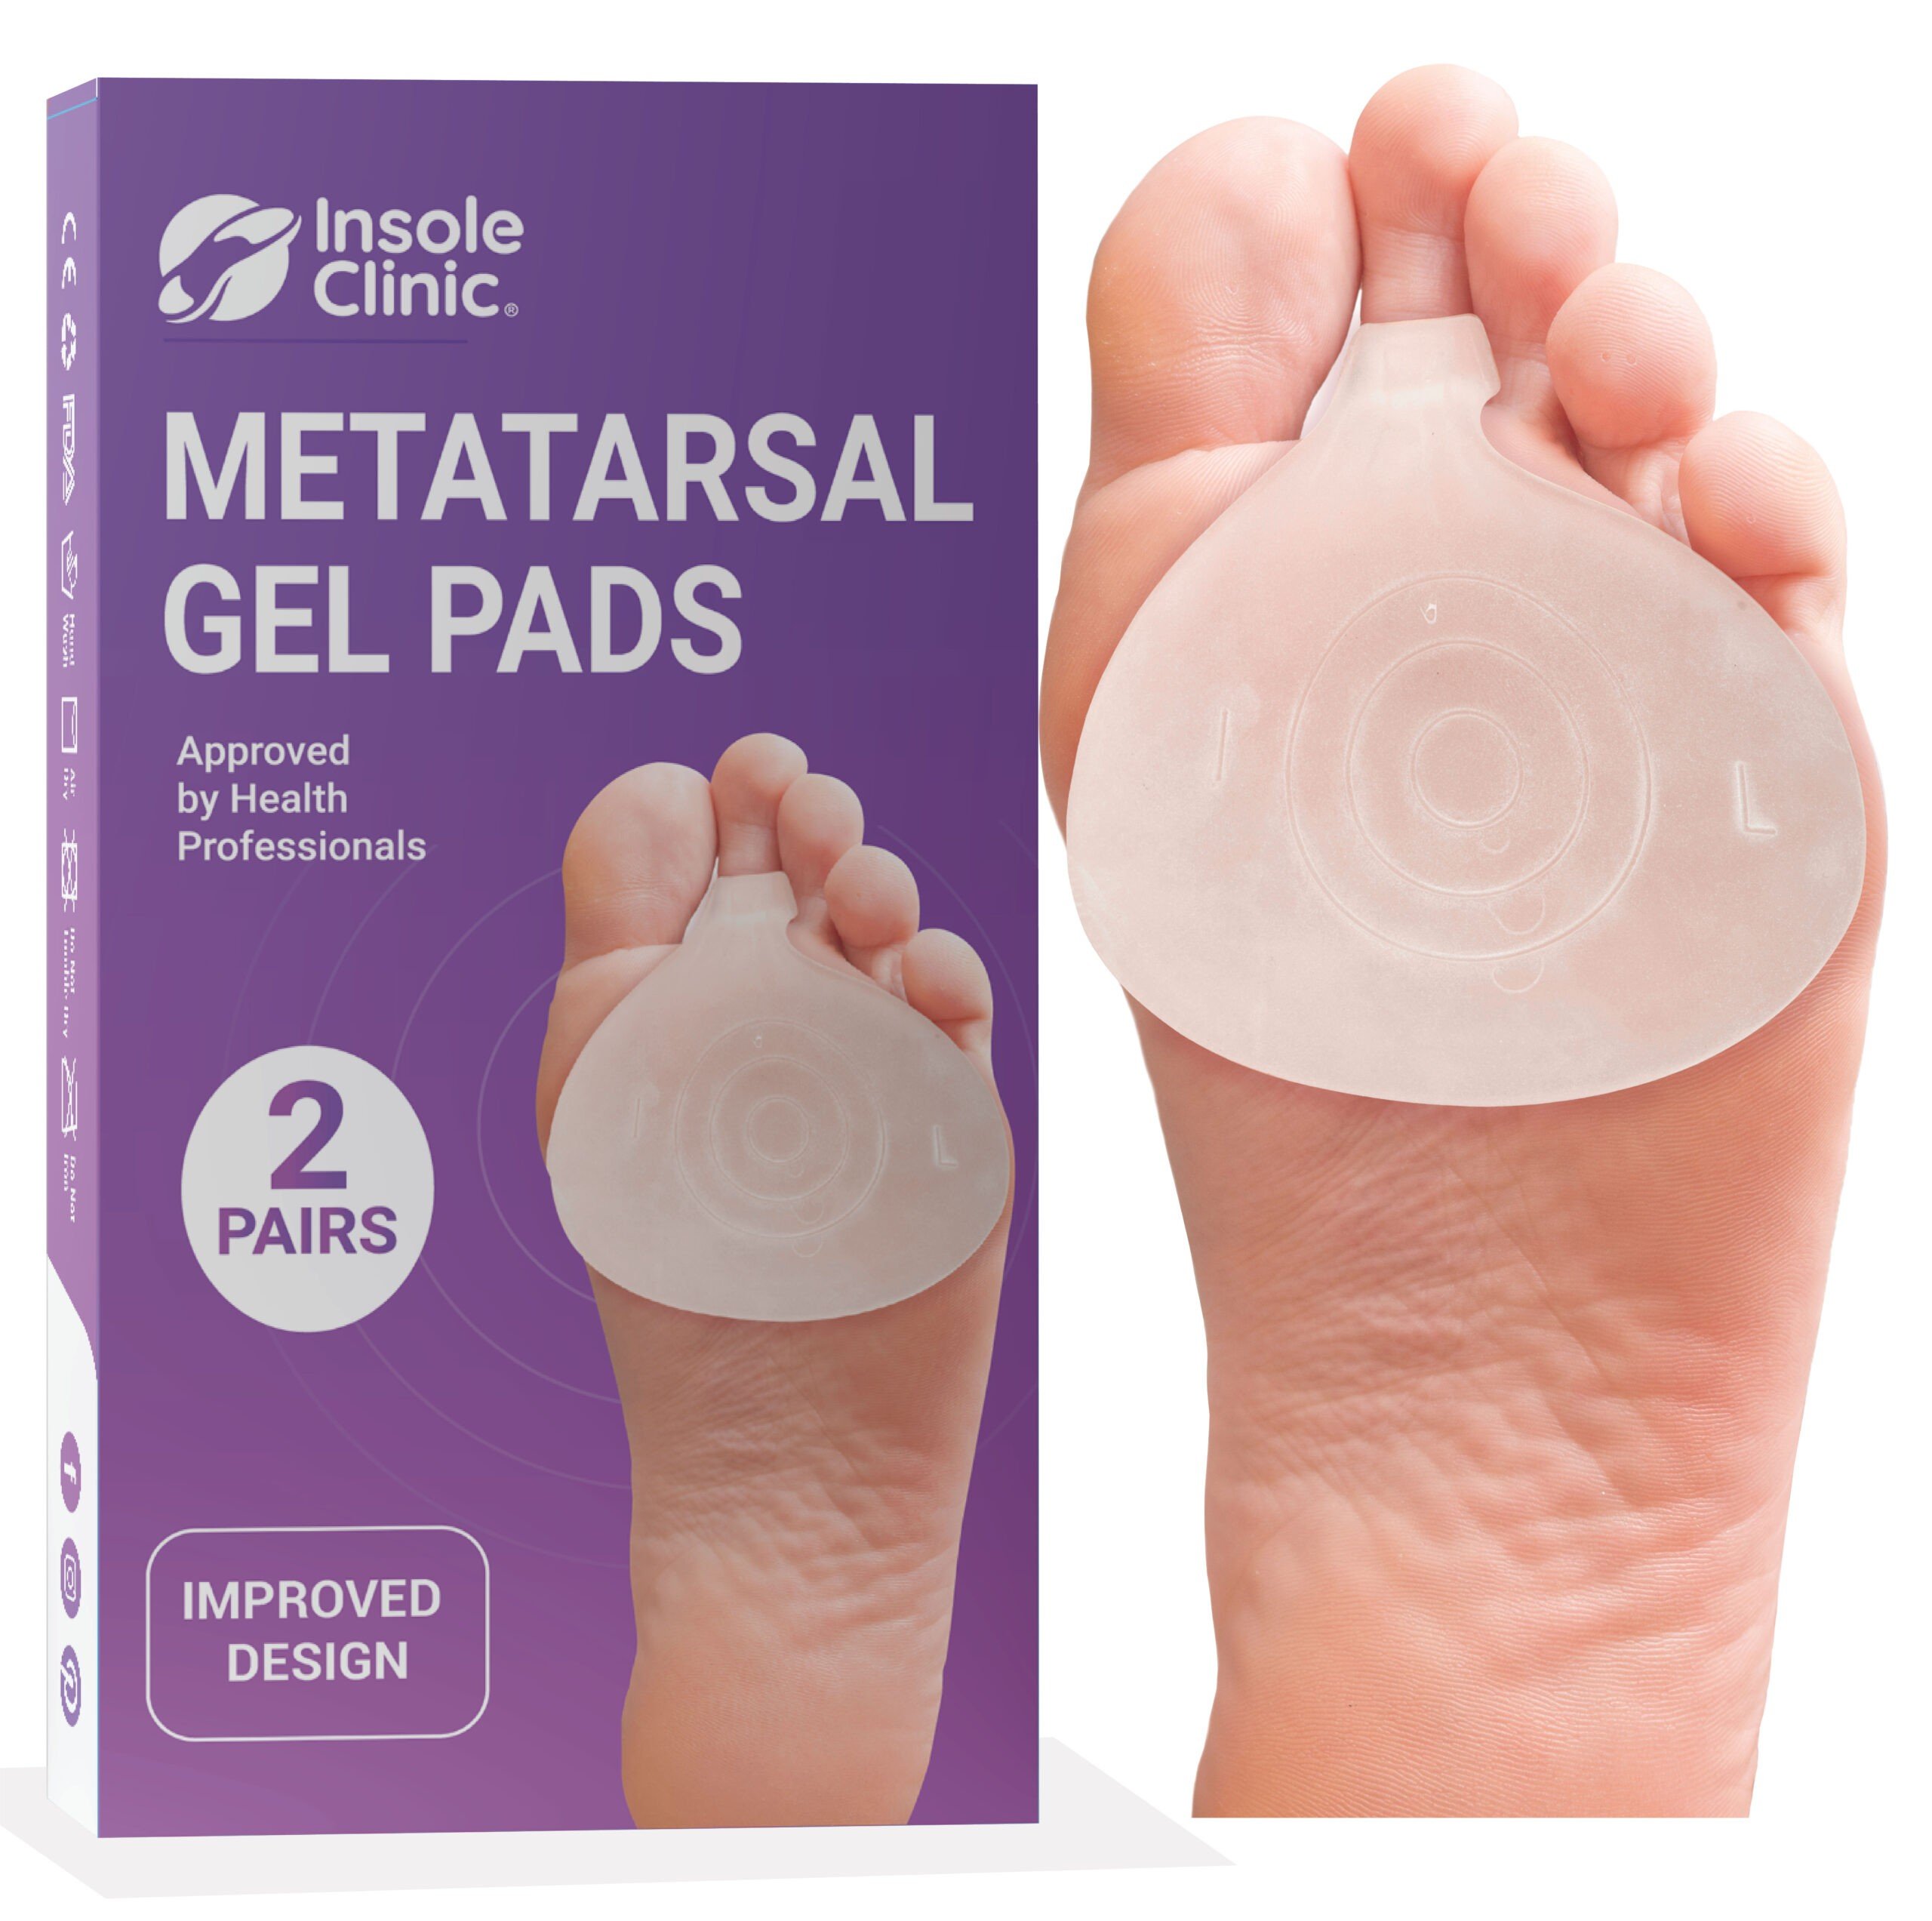 Metatarsal Gel Pads For Ball Of Foot Pain